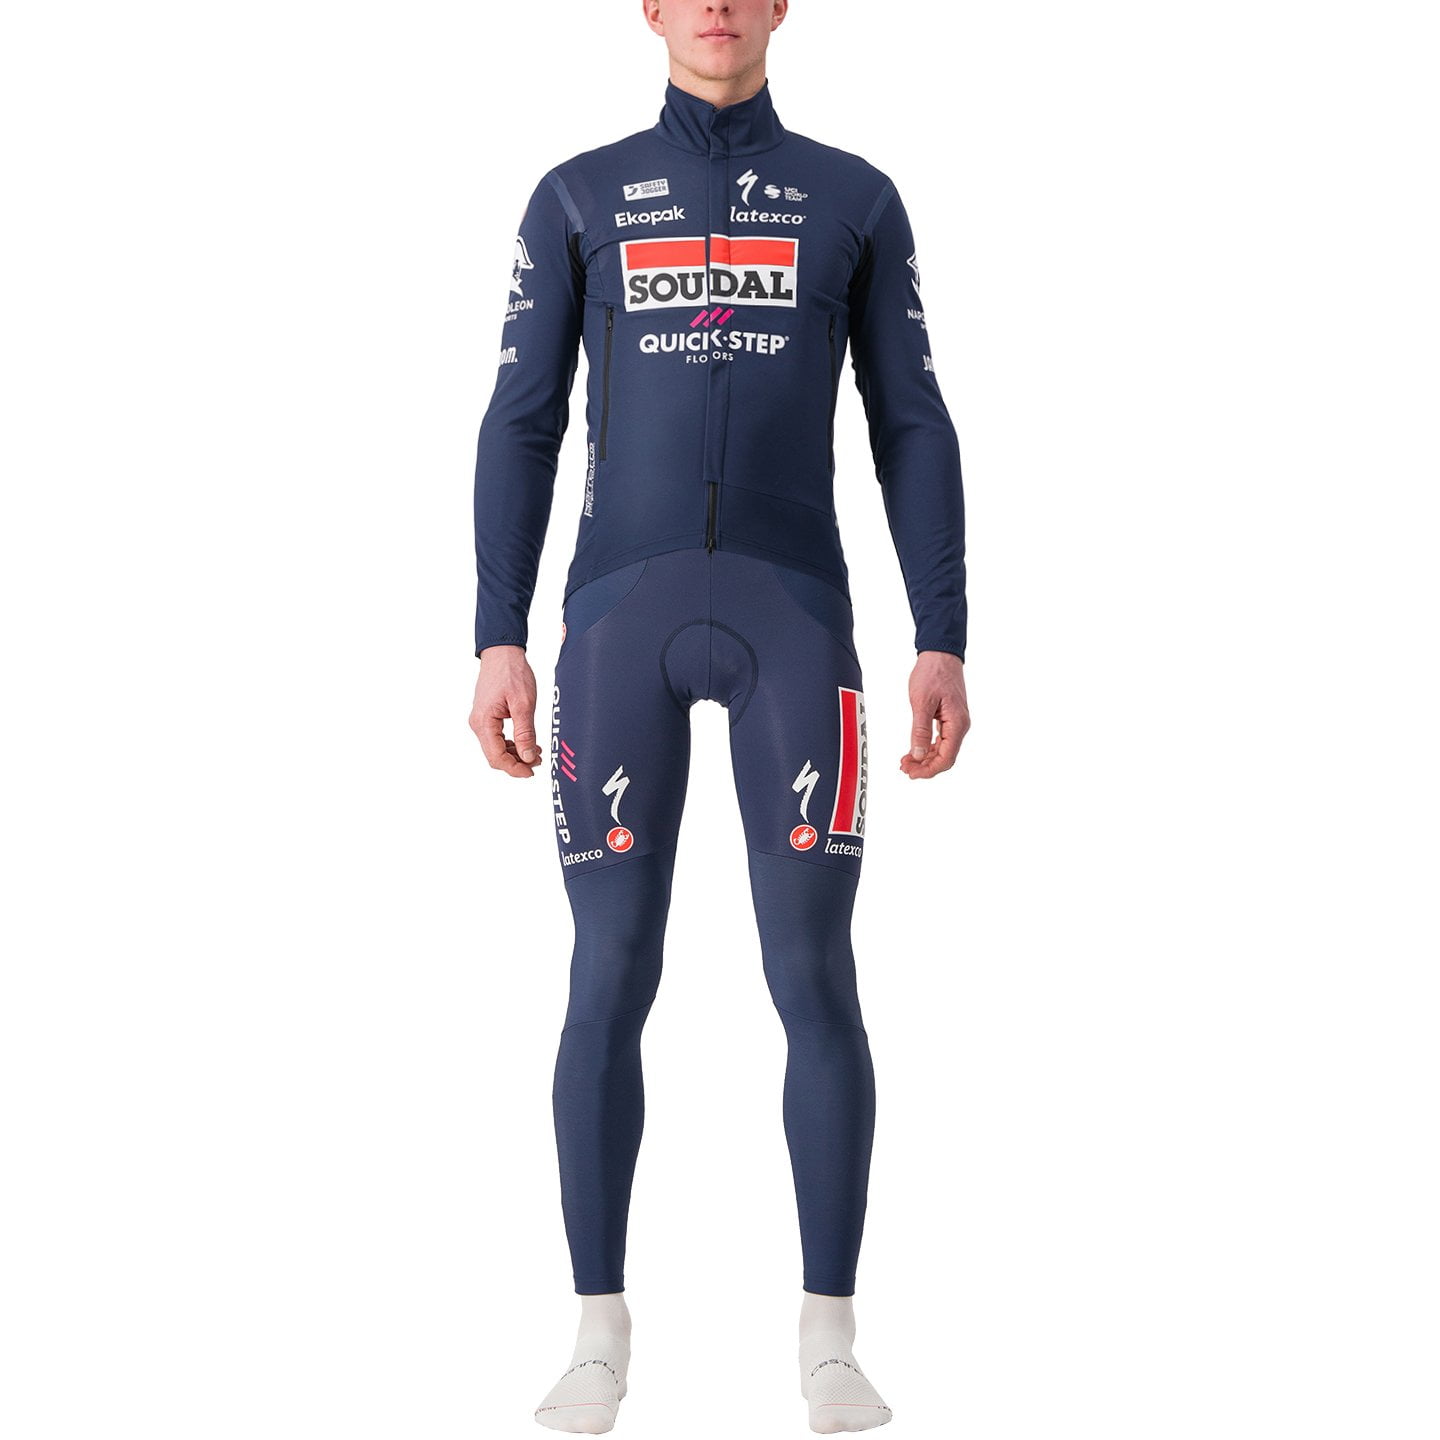 SOUDAL QUICK-STEP Perfetto RoS 2 23 Set (winter jacket + cycling tights) Set (2 pieces), for men